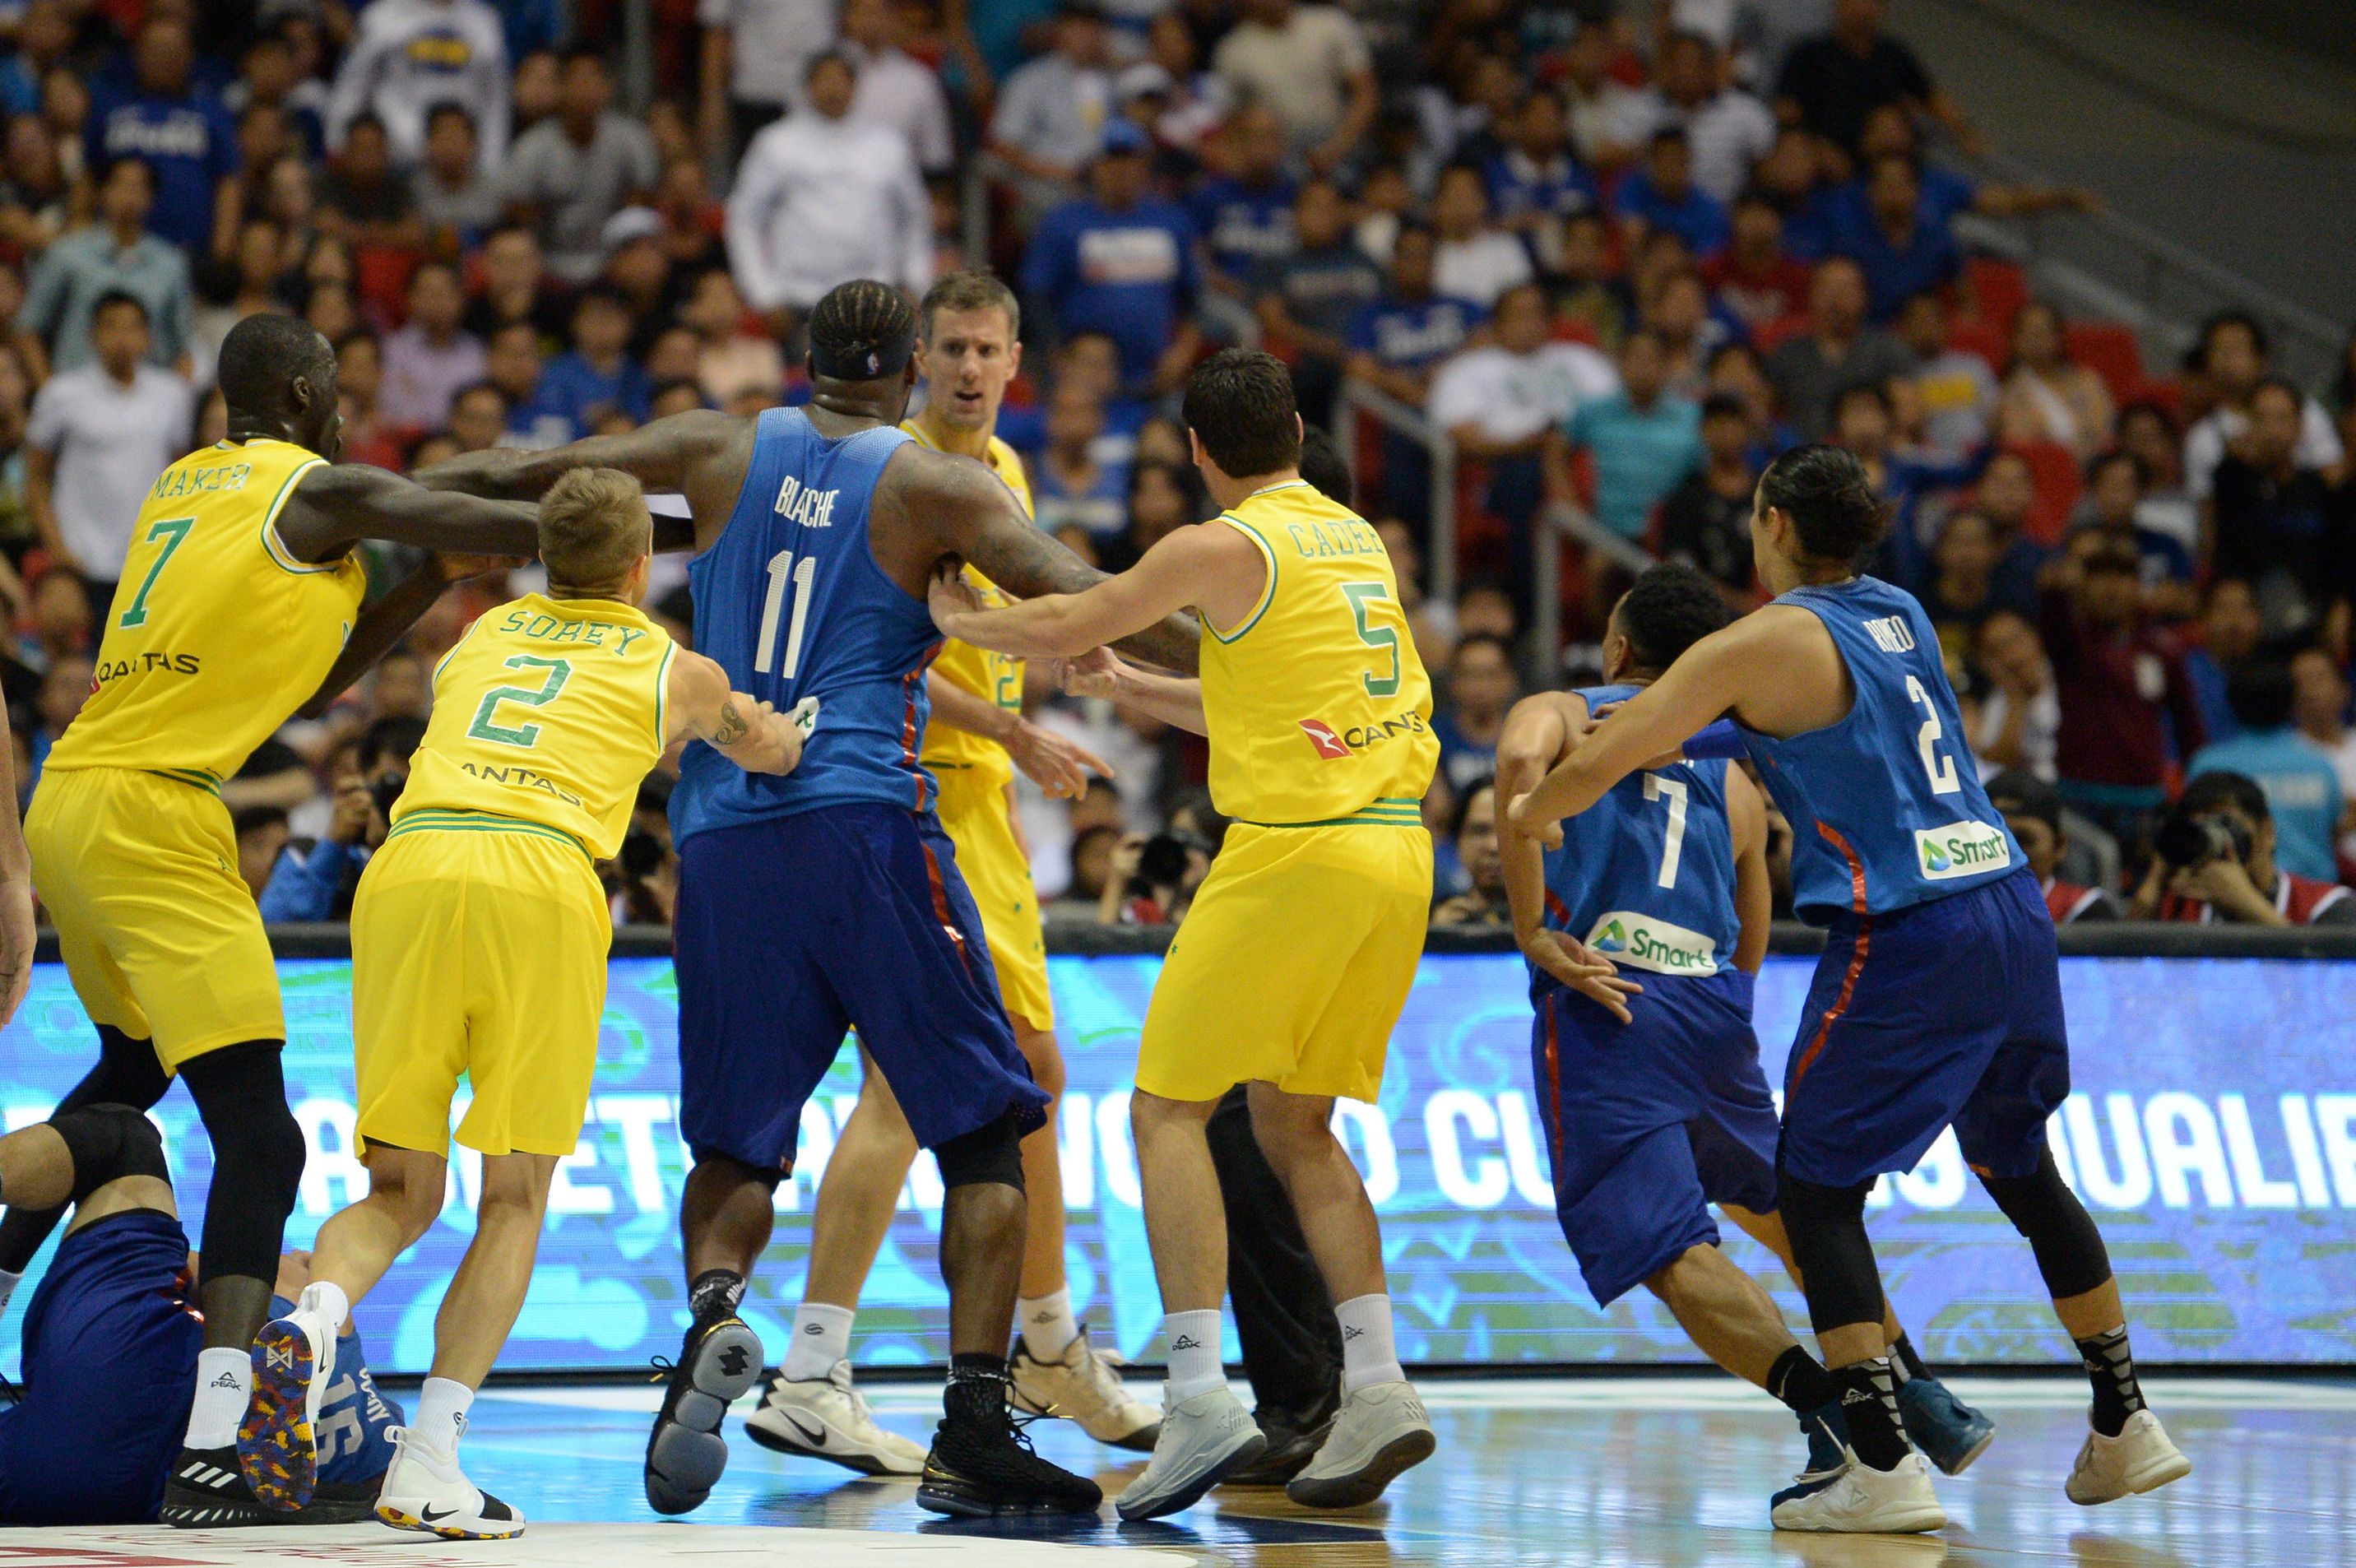 Philippine (blue) and Australian (yellow) players engage in a brawl during their FIBA World Cup Asian qualifier game at the Philippine arena in Bocaue town, Bulacan province, north of Manila on July 2, 2018. - Australia won by default 89-53. (TED ALJIBE&mdash;AFP/Getty Images)